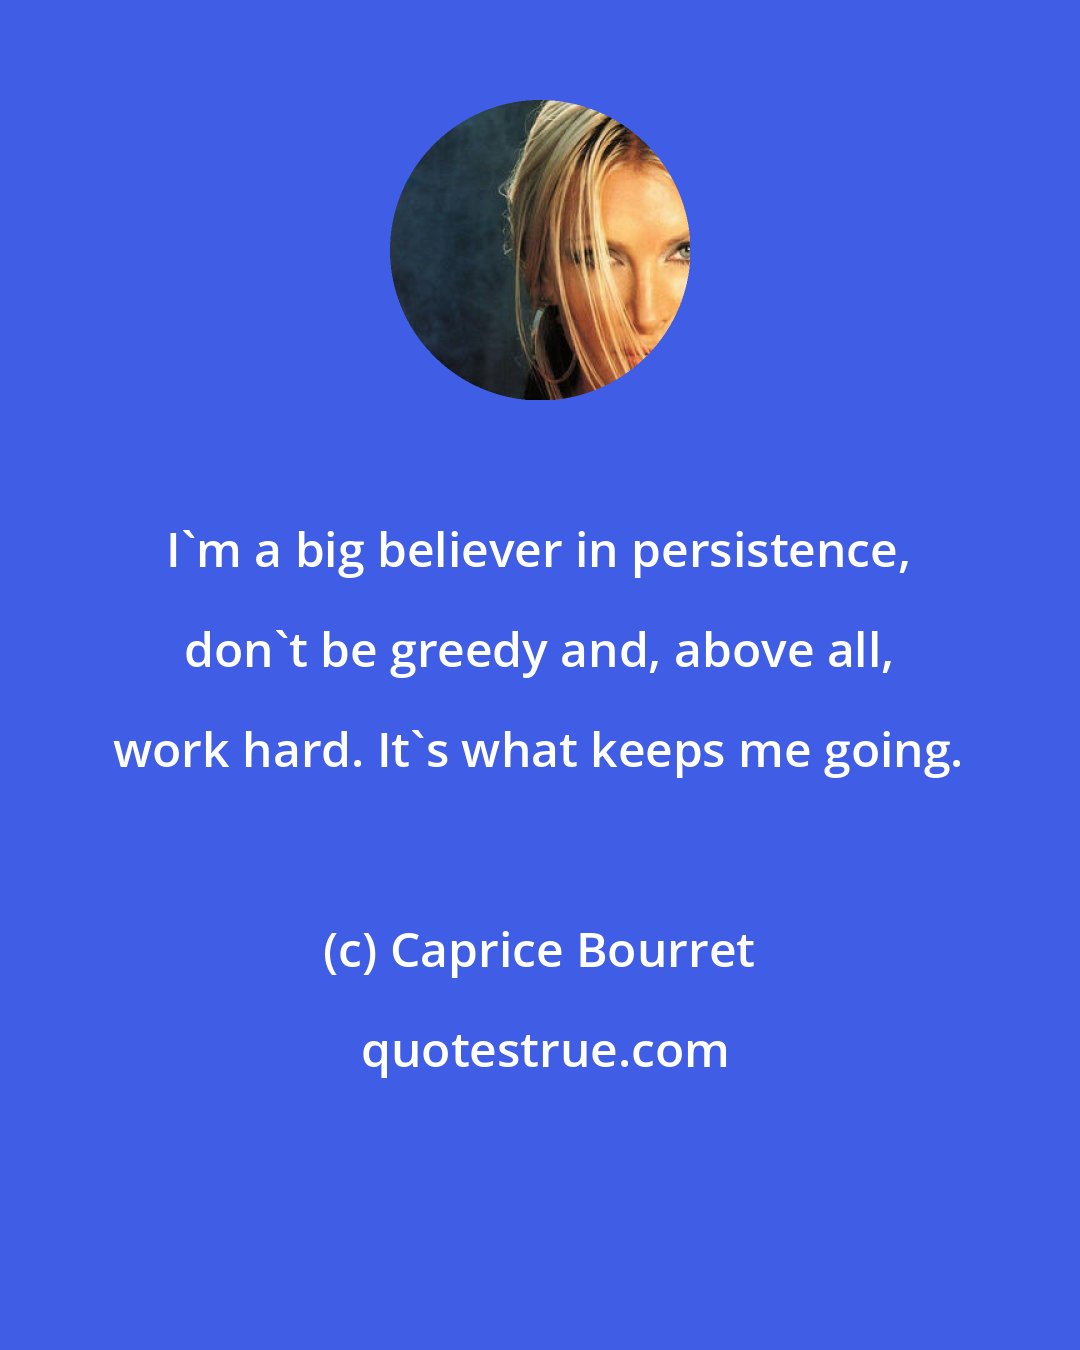 Caprice Bourret: I'm a big believer in persistence, don't be greedy and, above all, work hard. It's what keeps me going.